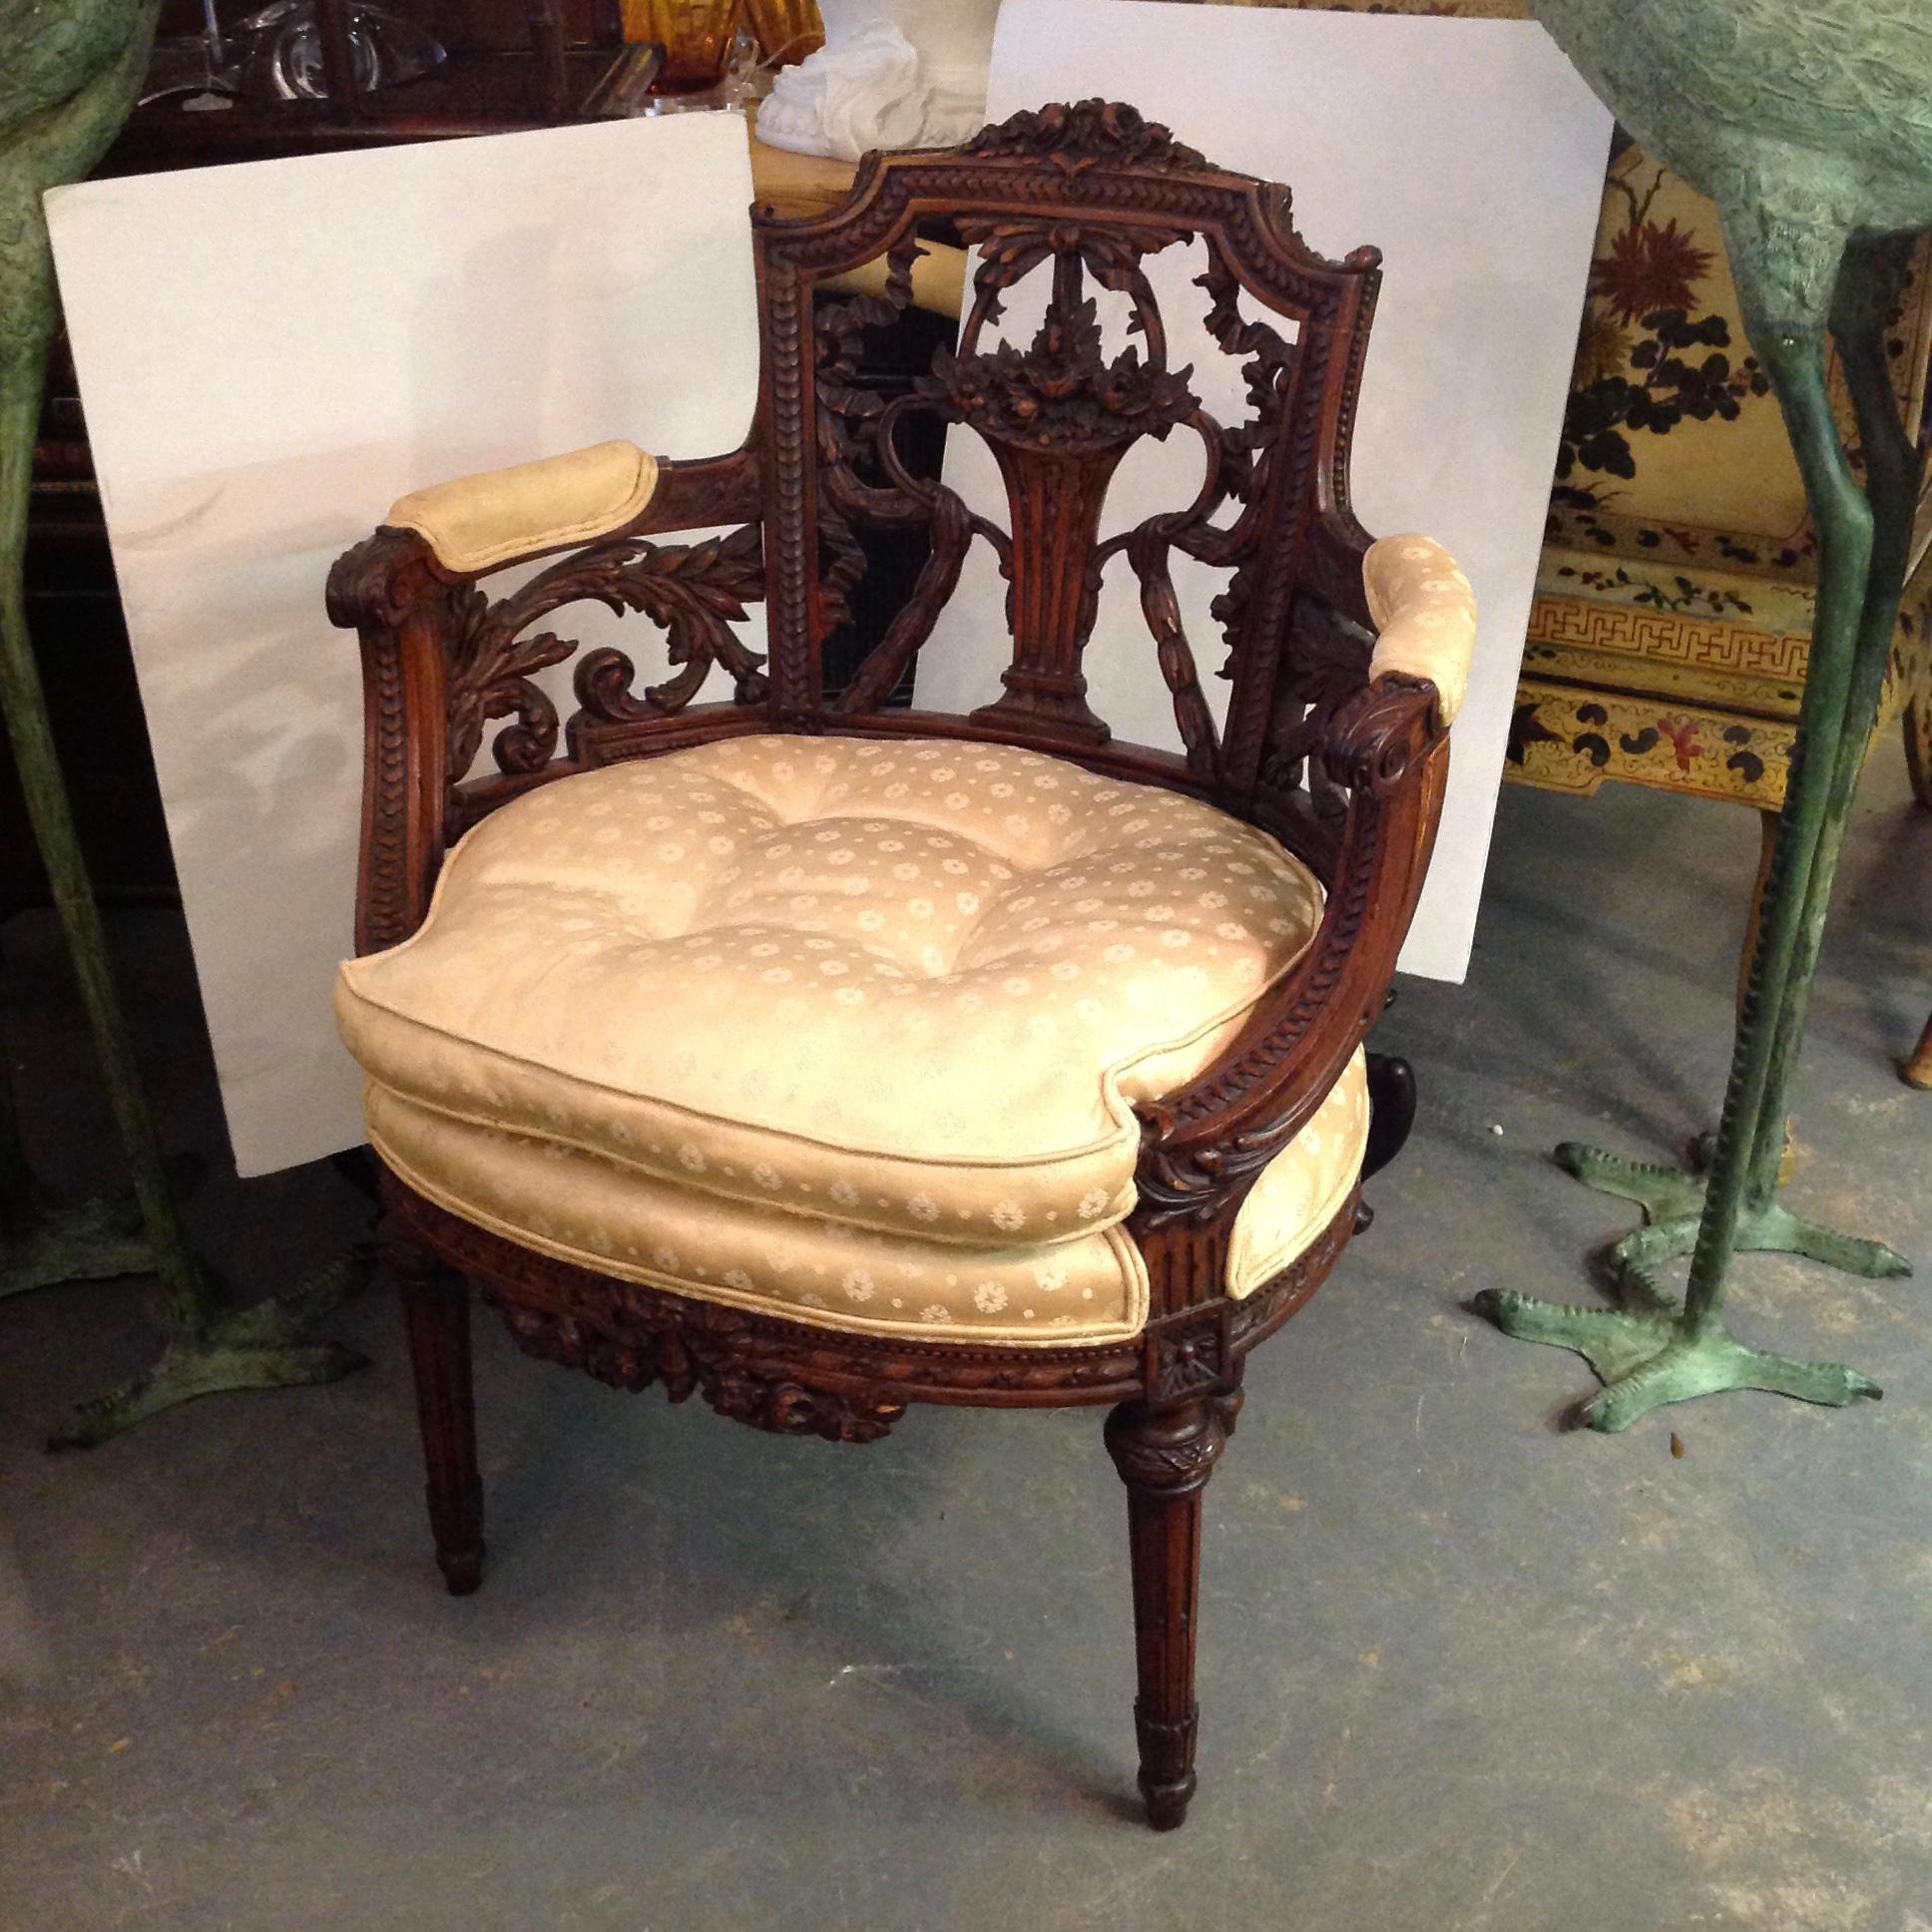 Exquisite and exceptional carving, festooned with swag and ribbon carving.
The back rest is adorned with a magnificent basket of flowers.
Nice silk upholstery.